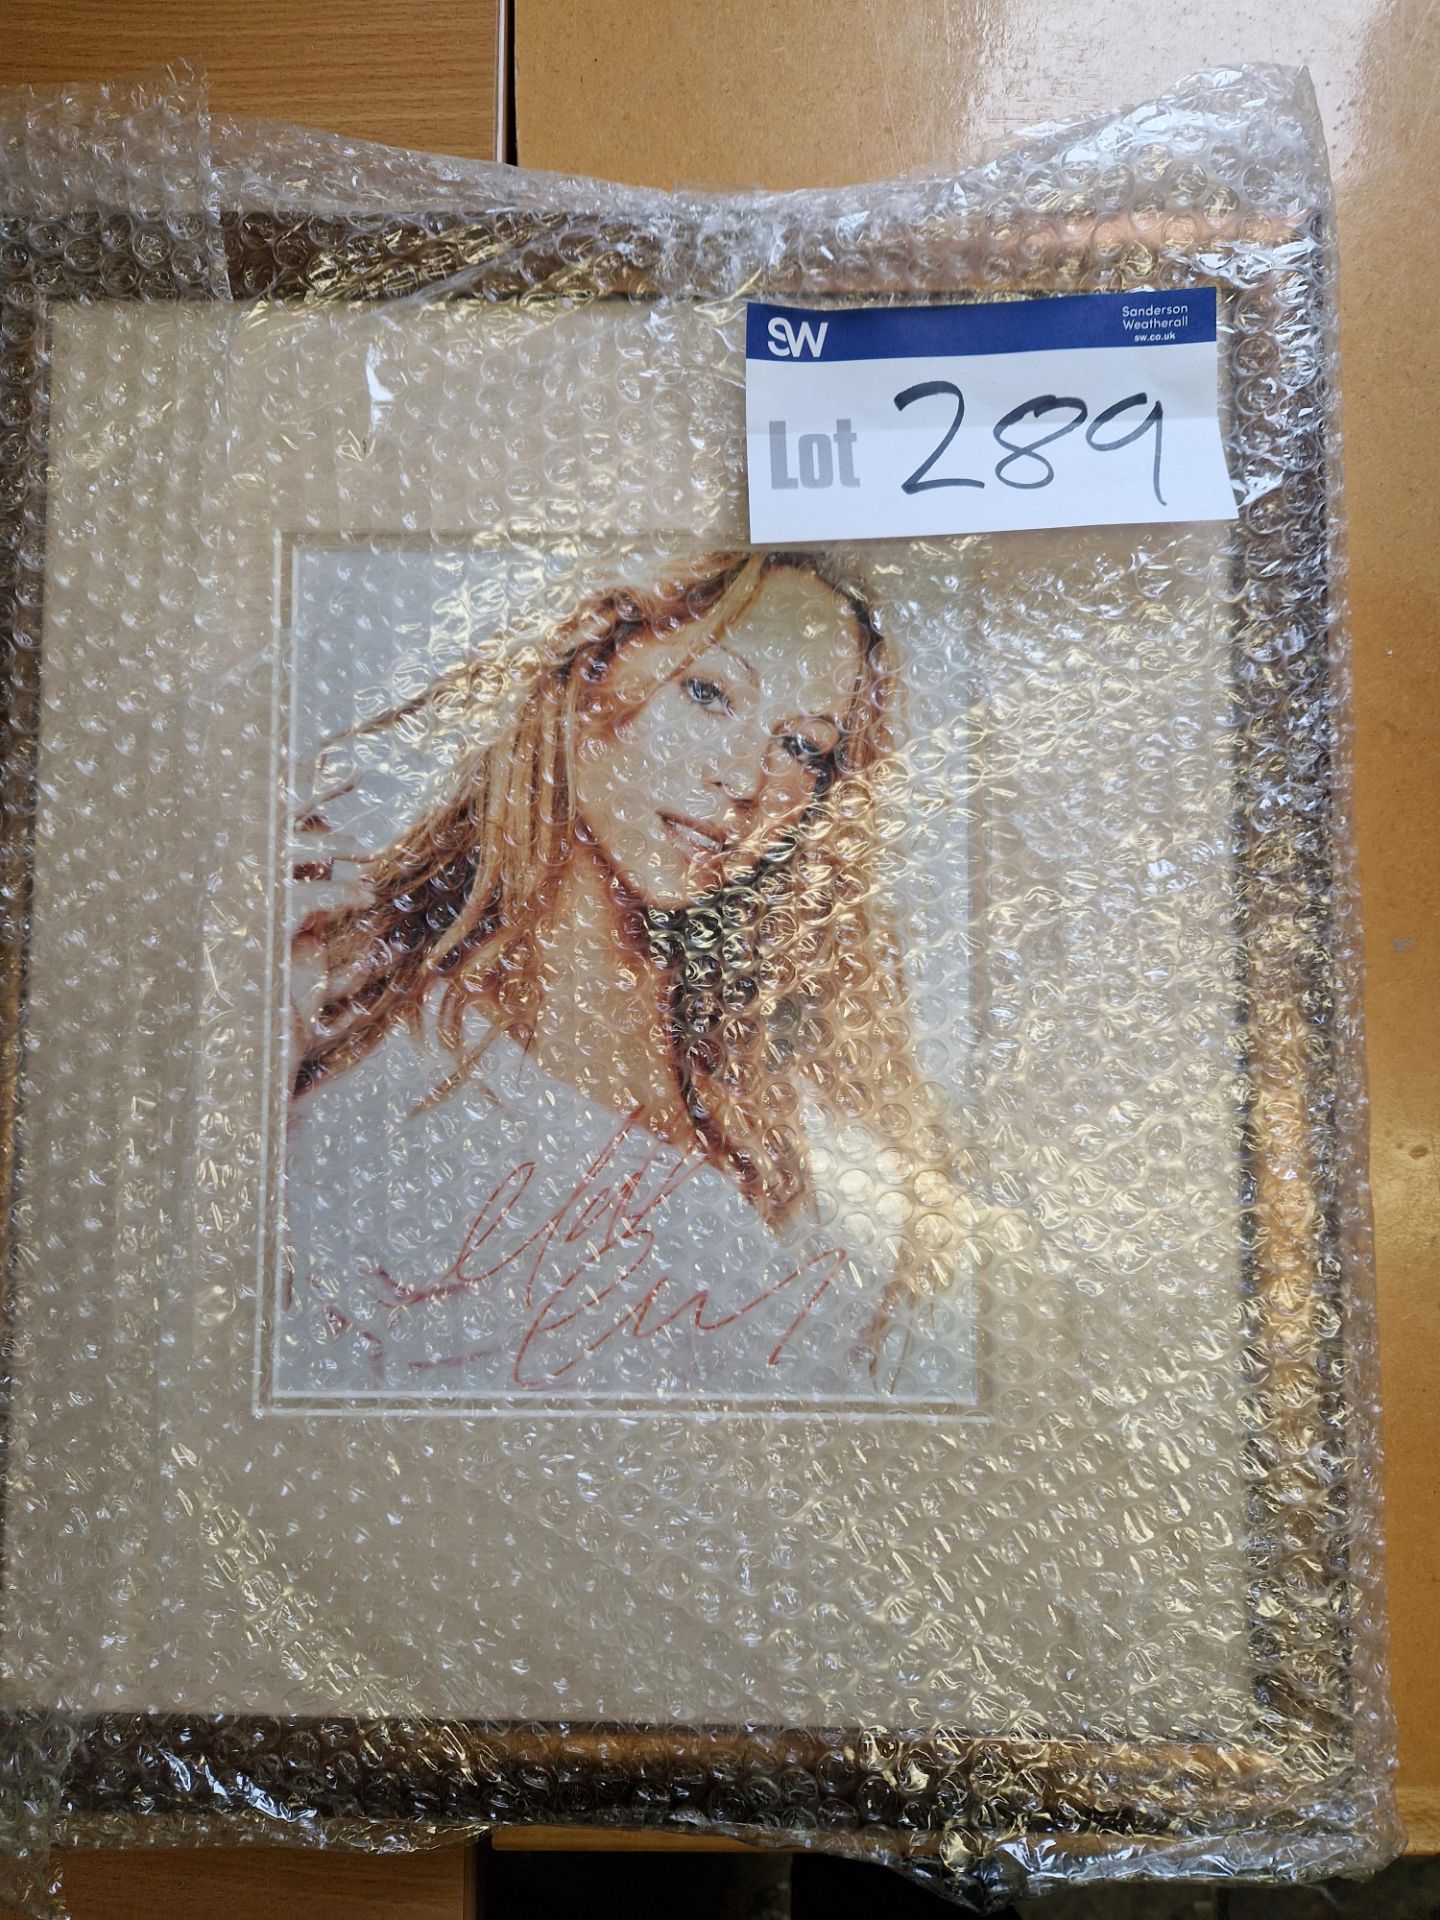 Signed Photograph of Mariah Carey, with certificate of authenticity (2010)Please read the